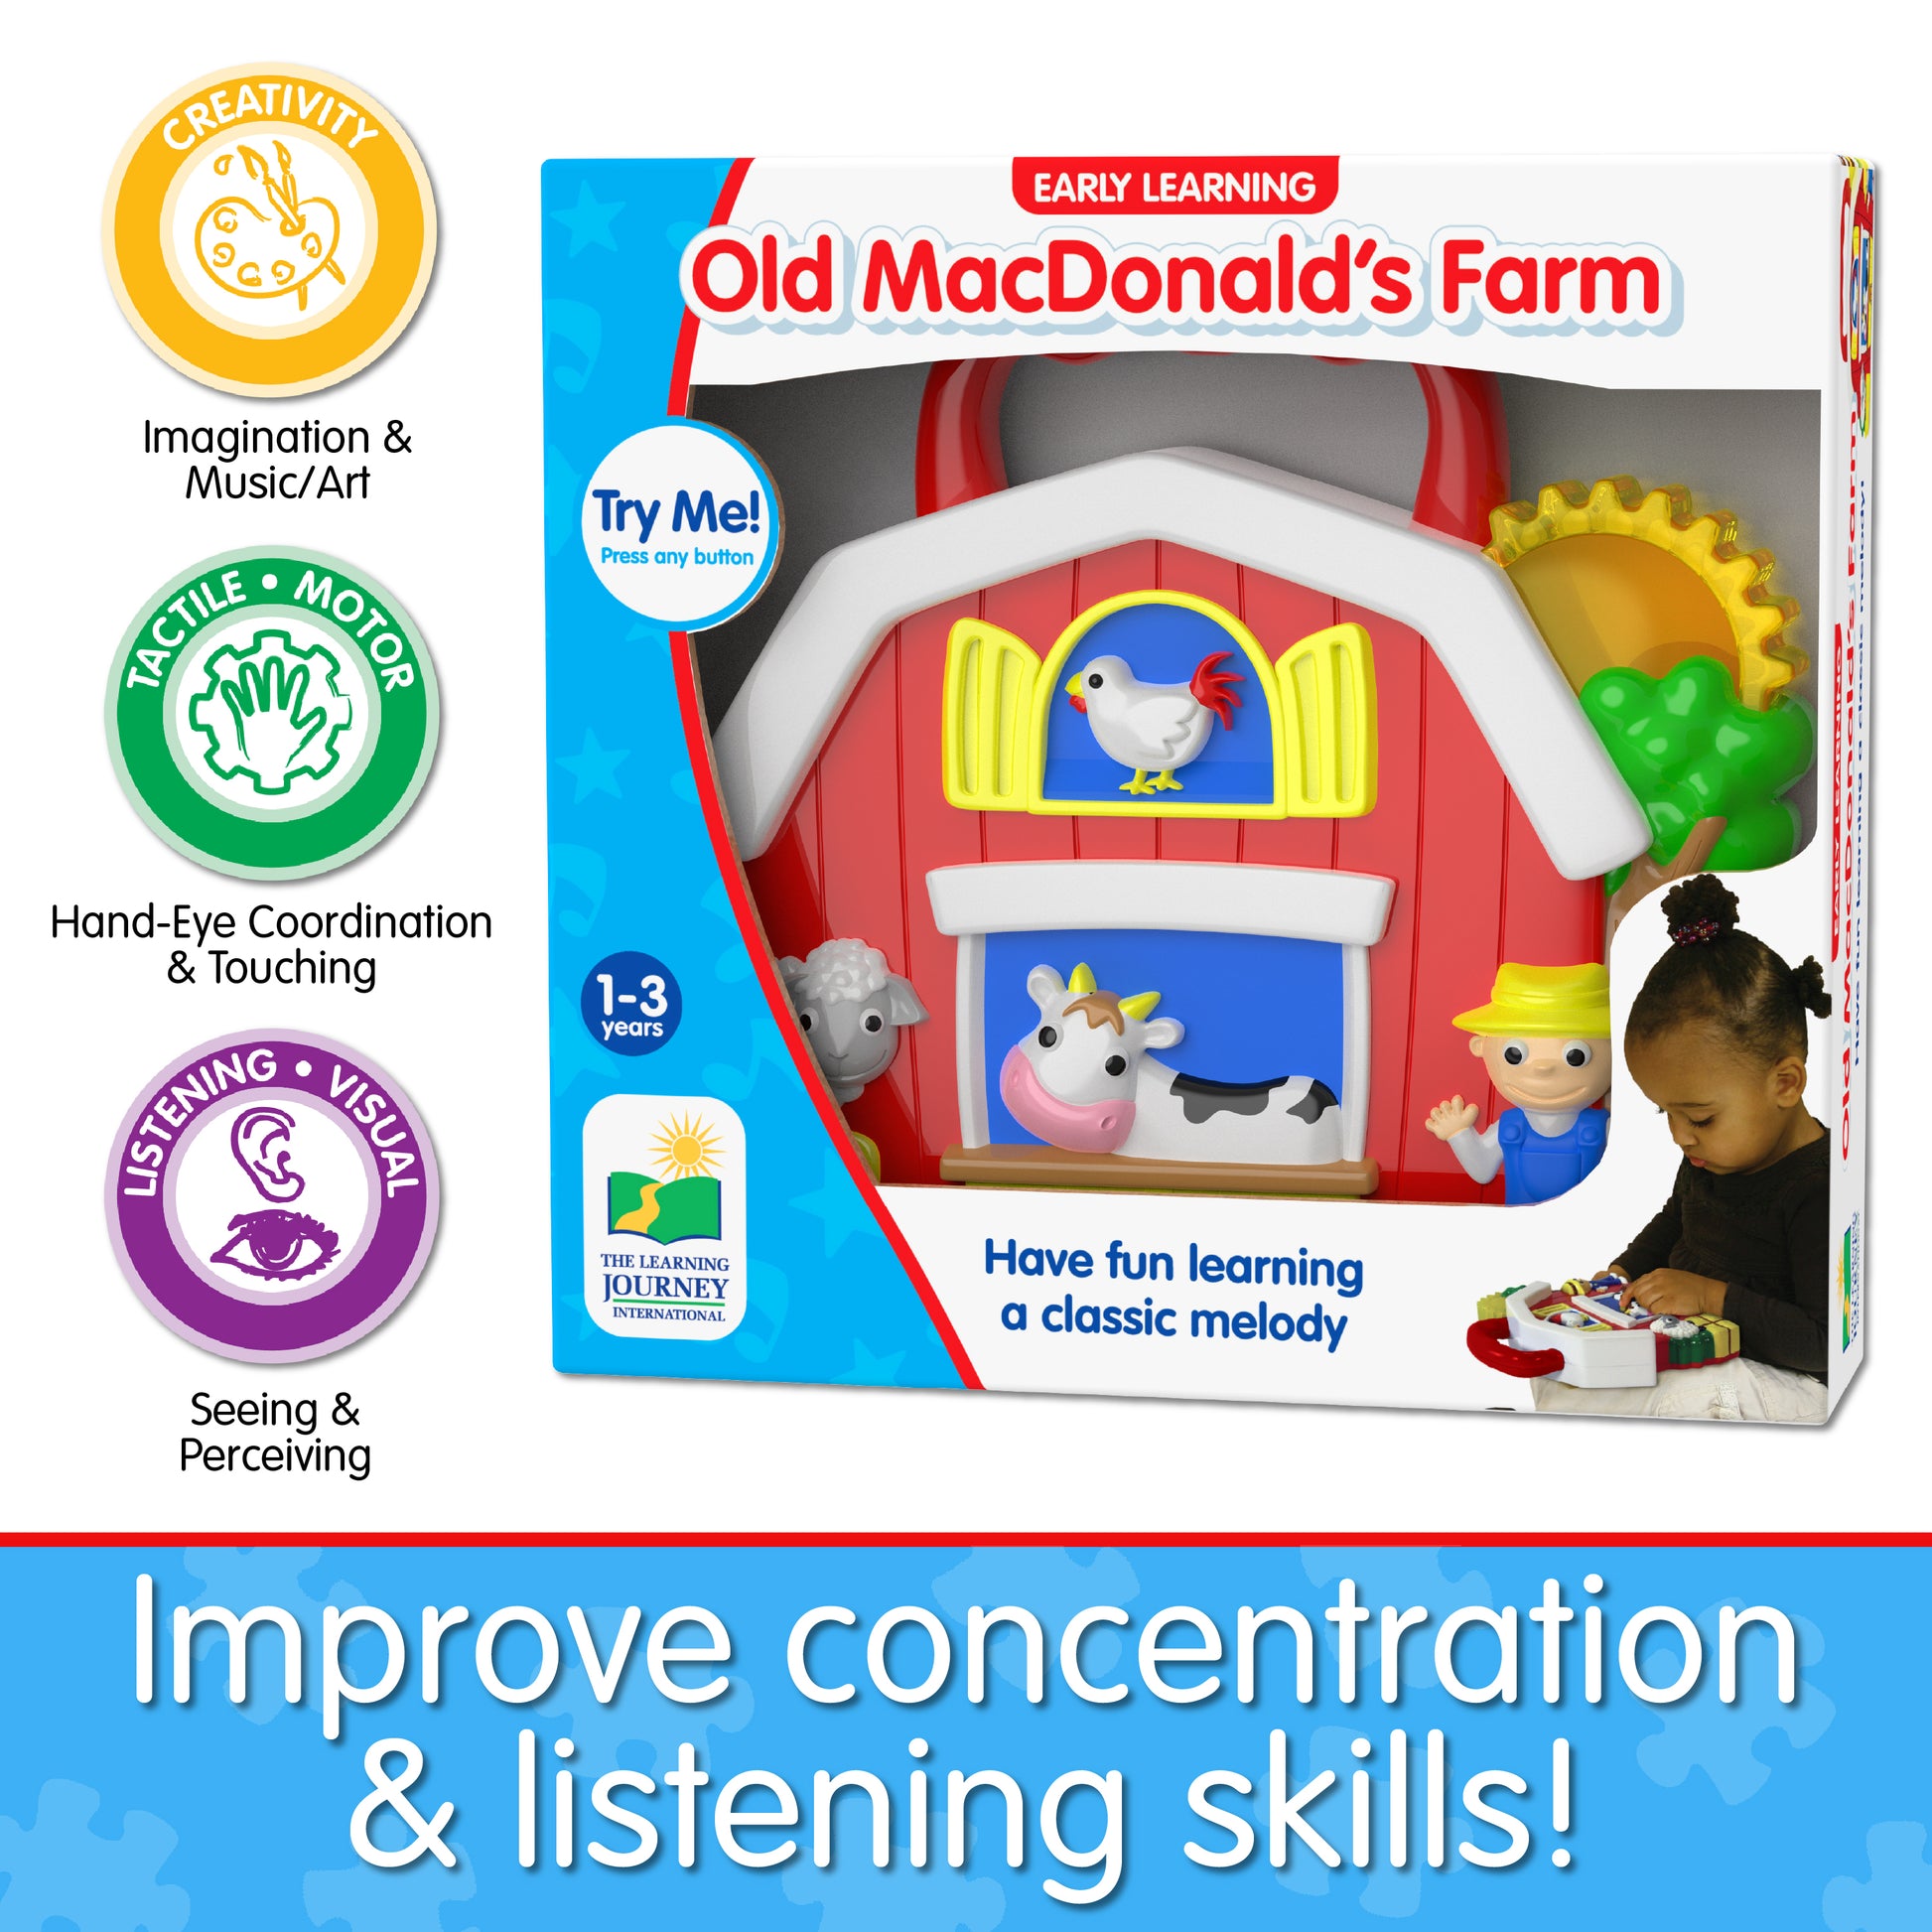 Infographic of Old MacDonald's Farm's educational benefits that reads "Improve concentration and listening skills!